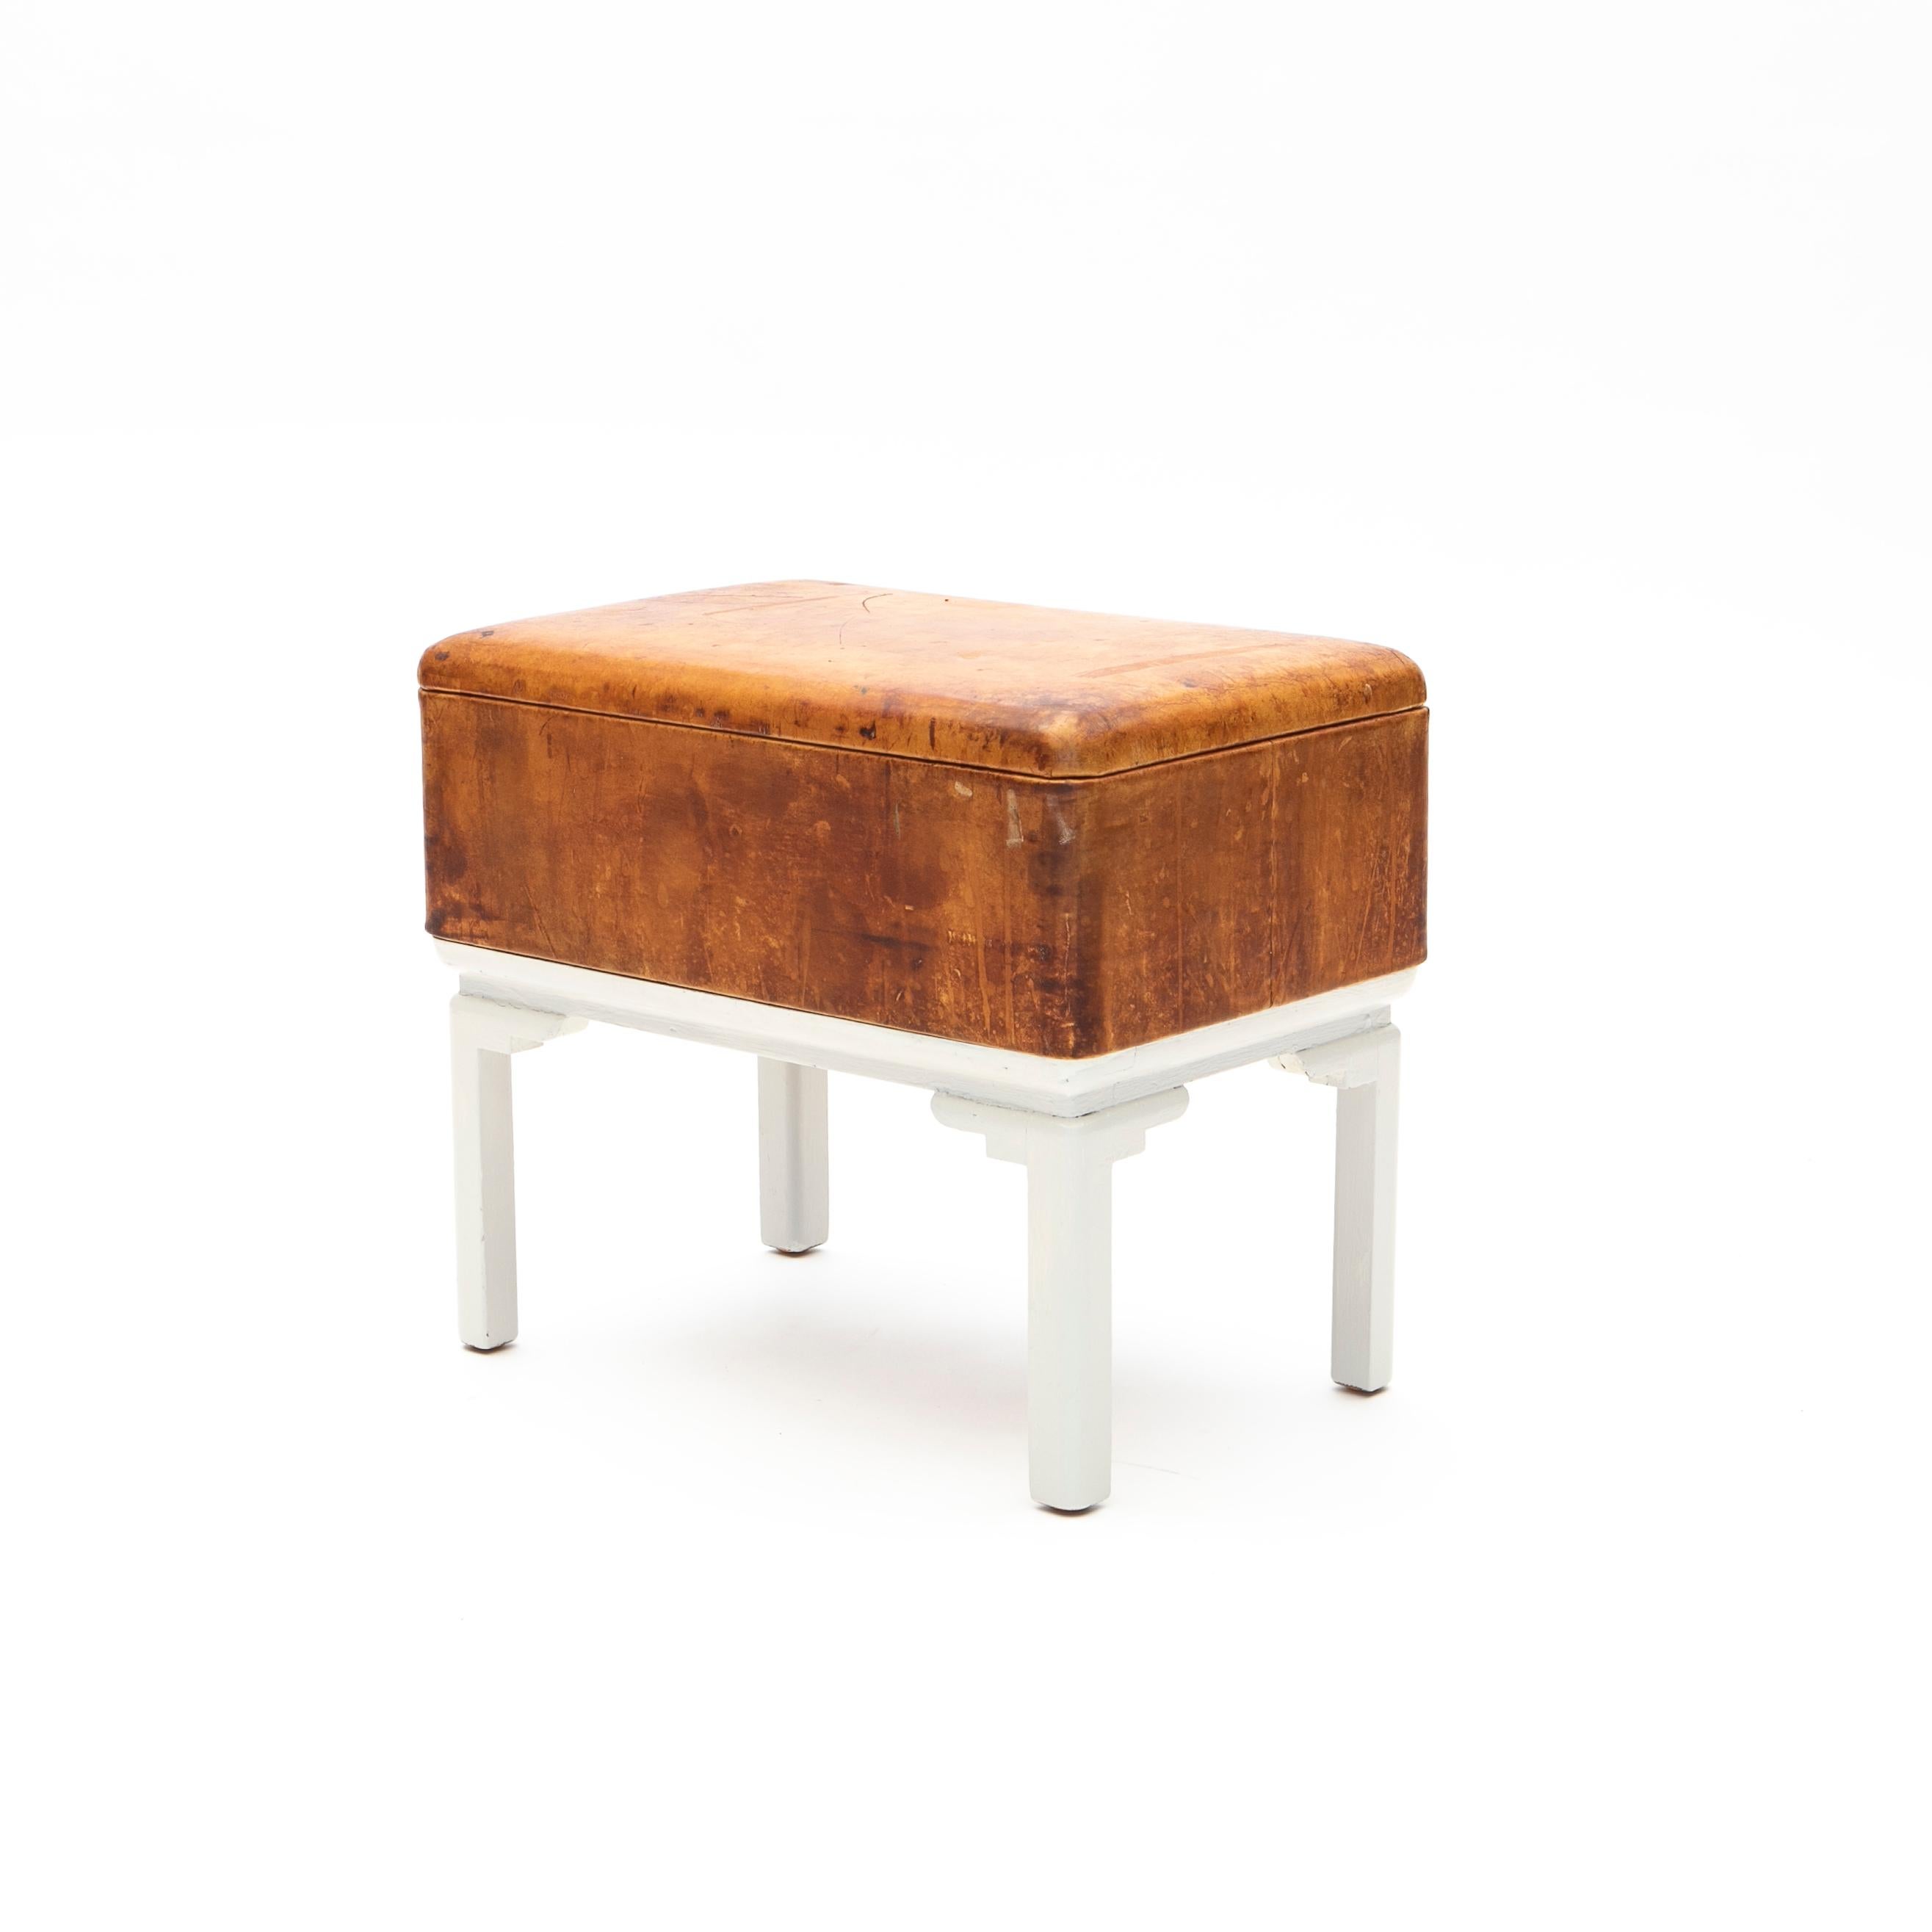 Danish art deco storage stool. 
Base in white painted wood. Seat with storage compartment.
Upholstered in natural leather.

Original leather with a beautiful age-related patina.
Denmark 1920-1930.